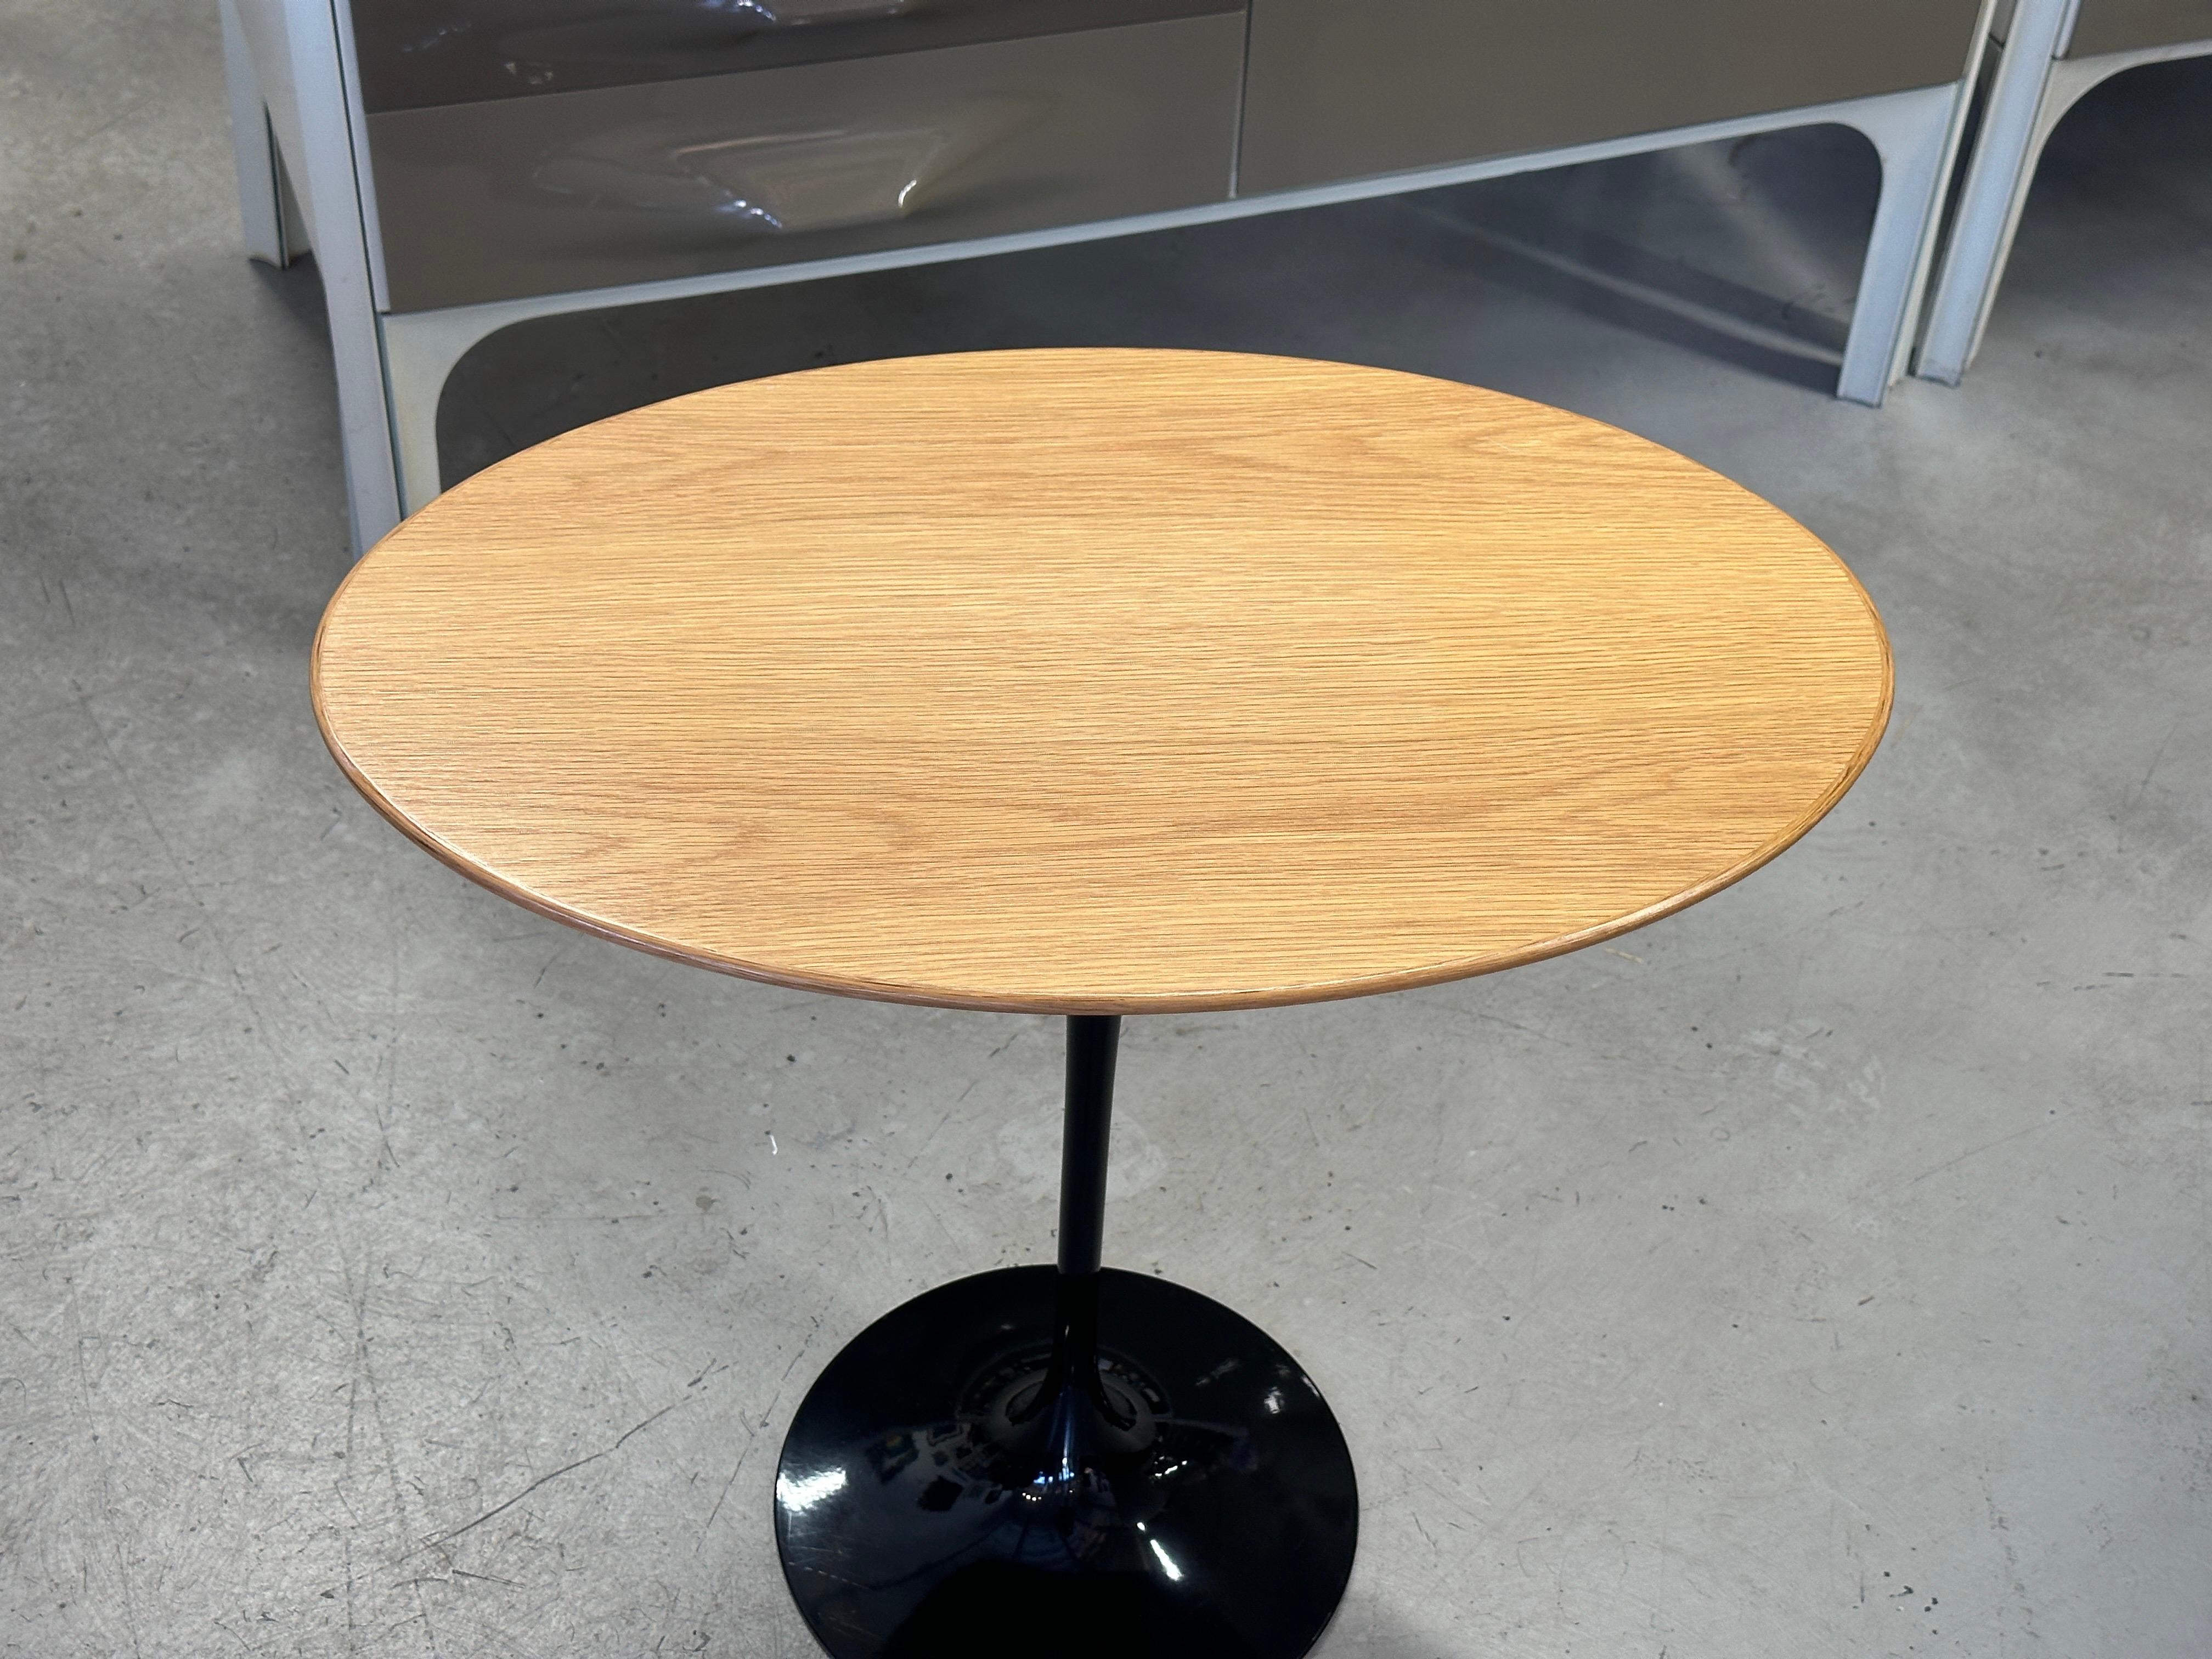 A beautiful example of an iconic design, this tulip table by Eero Saarinen is just stunning in this combination of a black base with a light oak top. Impressed on the base Knoll, and table bottom with stickers it is also dated from April of 2021.